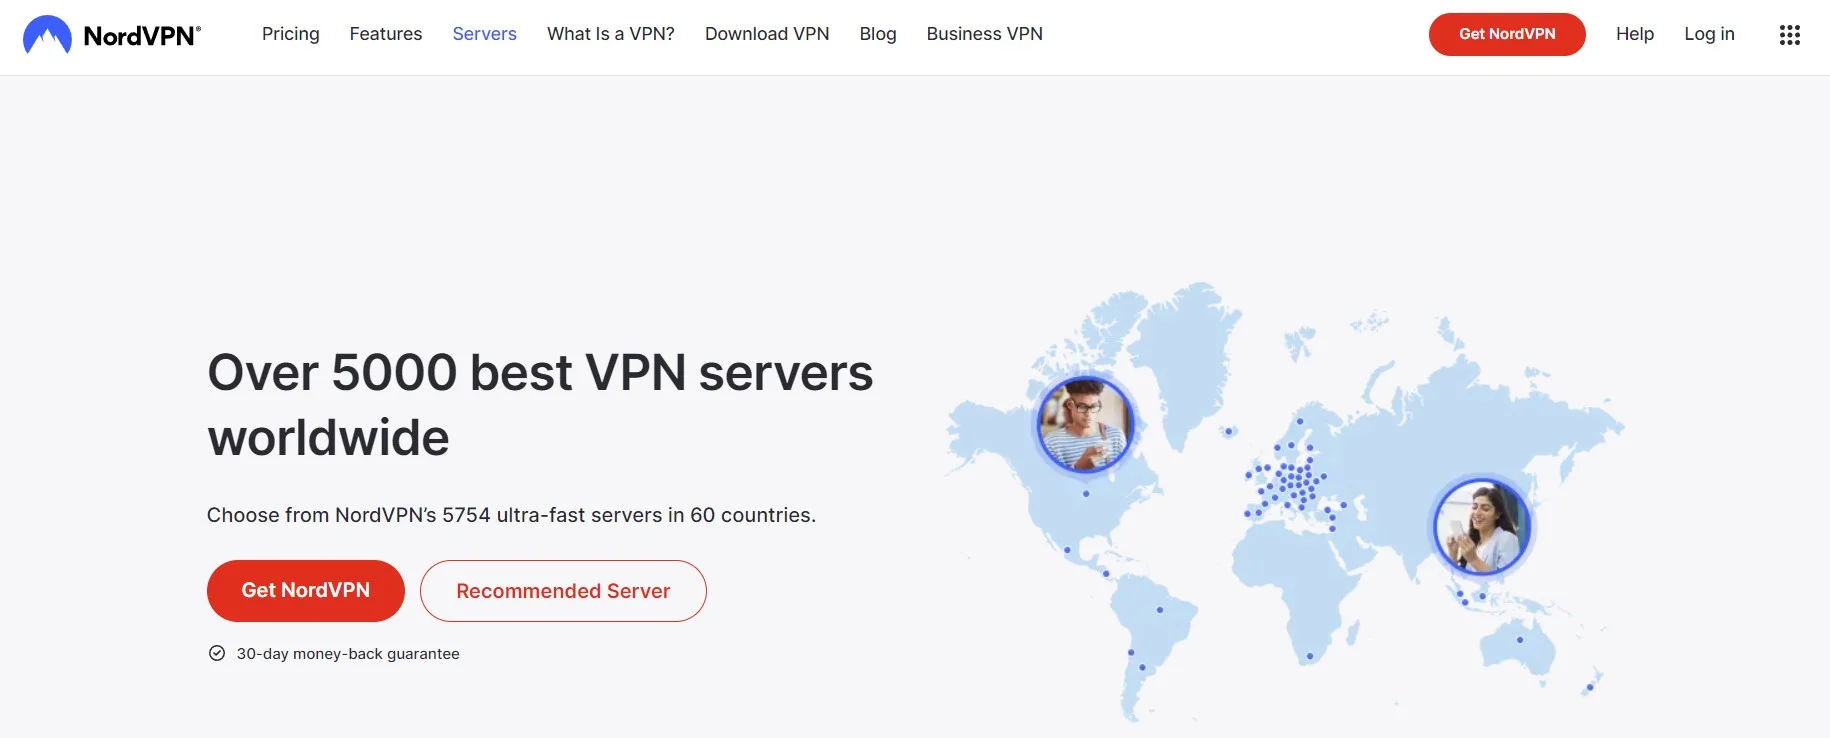 NordVPN is a popular VPN provider that has servers in over 60 countries